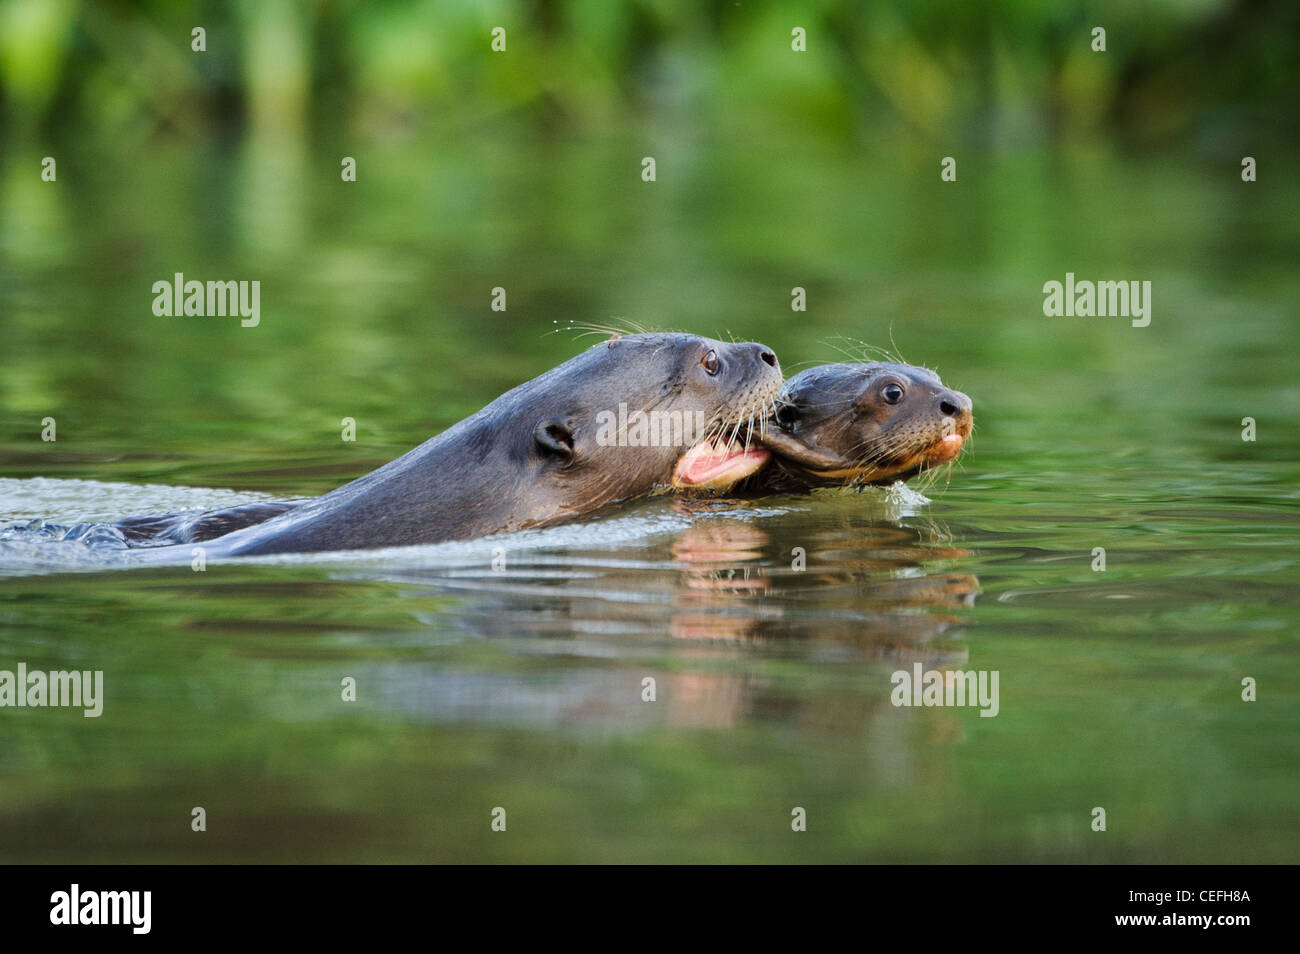 A Giant River Otter carrying a baby while swimming Stock Photo